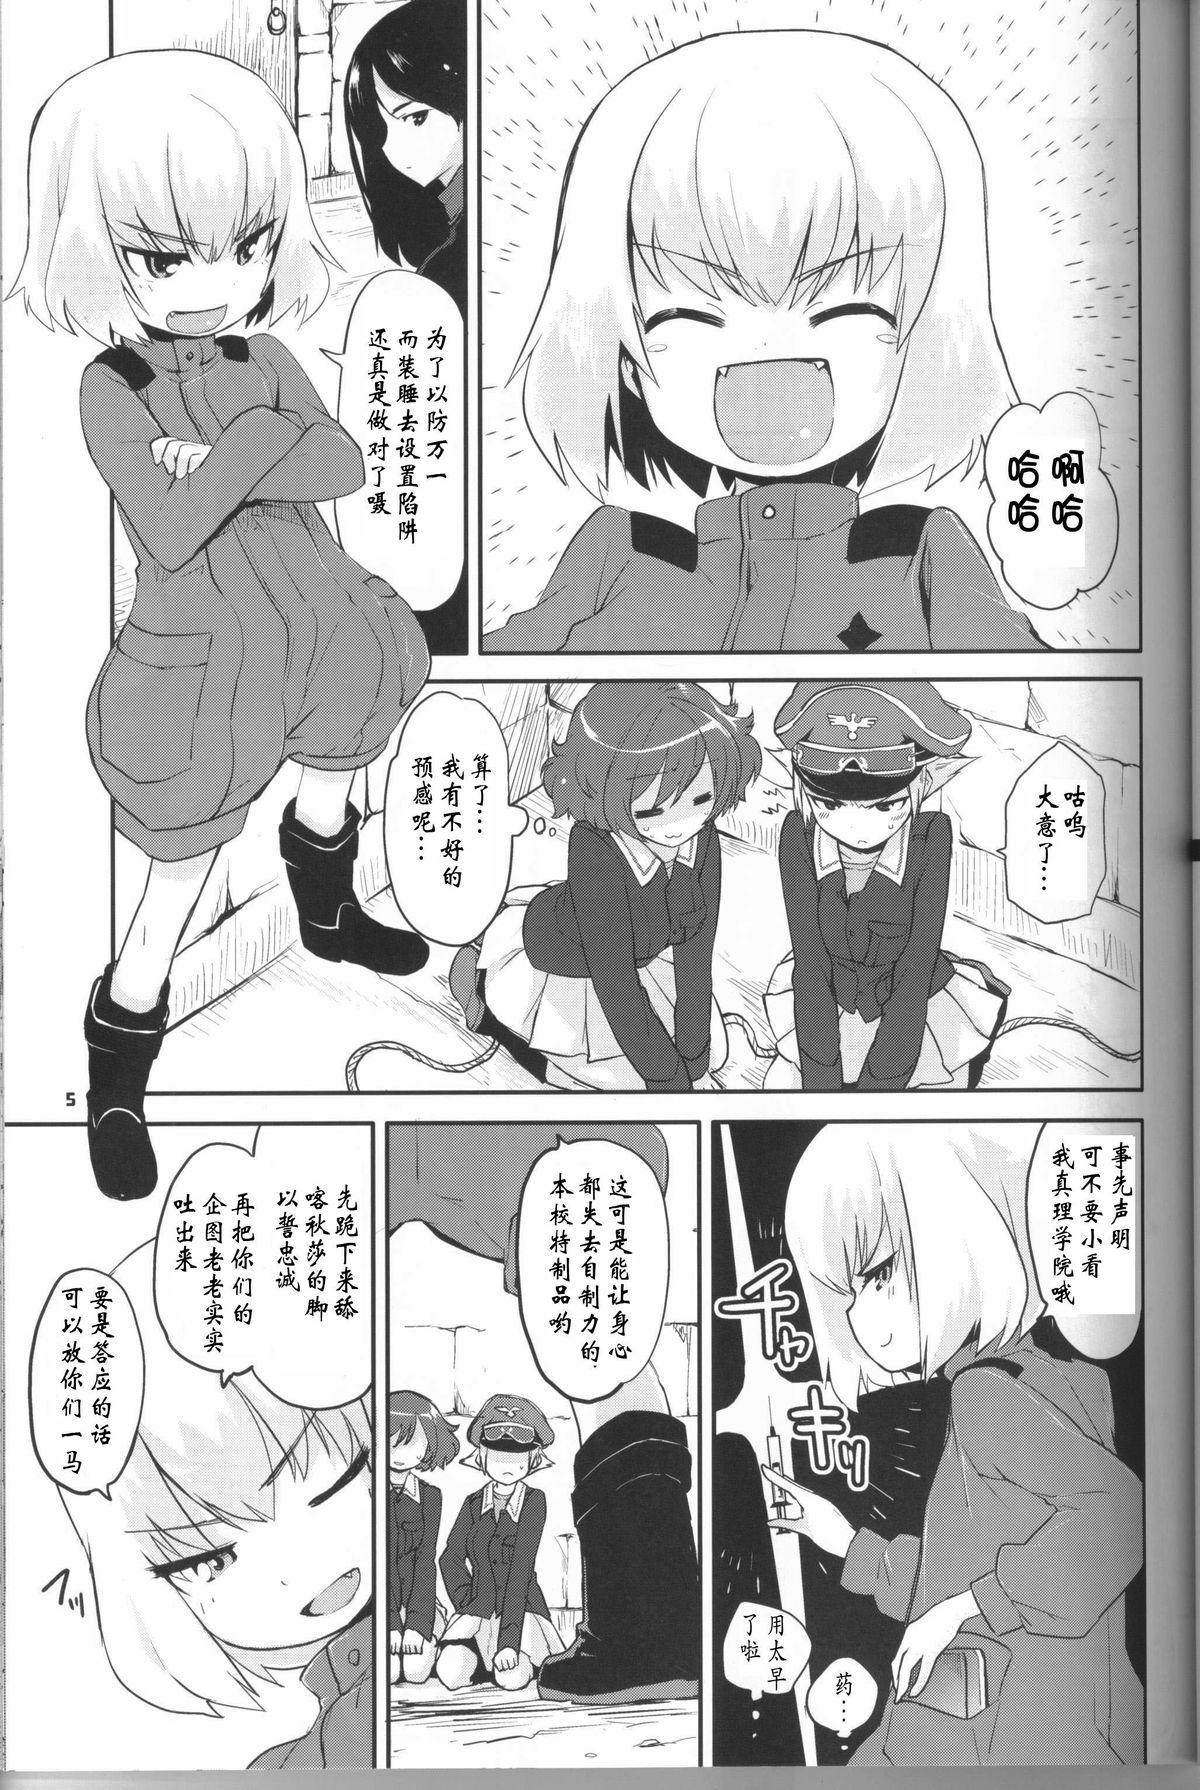 Cum On Pussy The General Frost Has Come! - Girls und panzer Village - Page 4